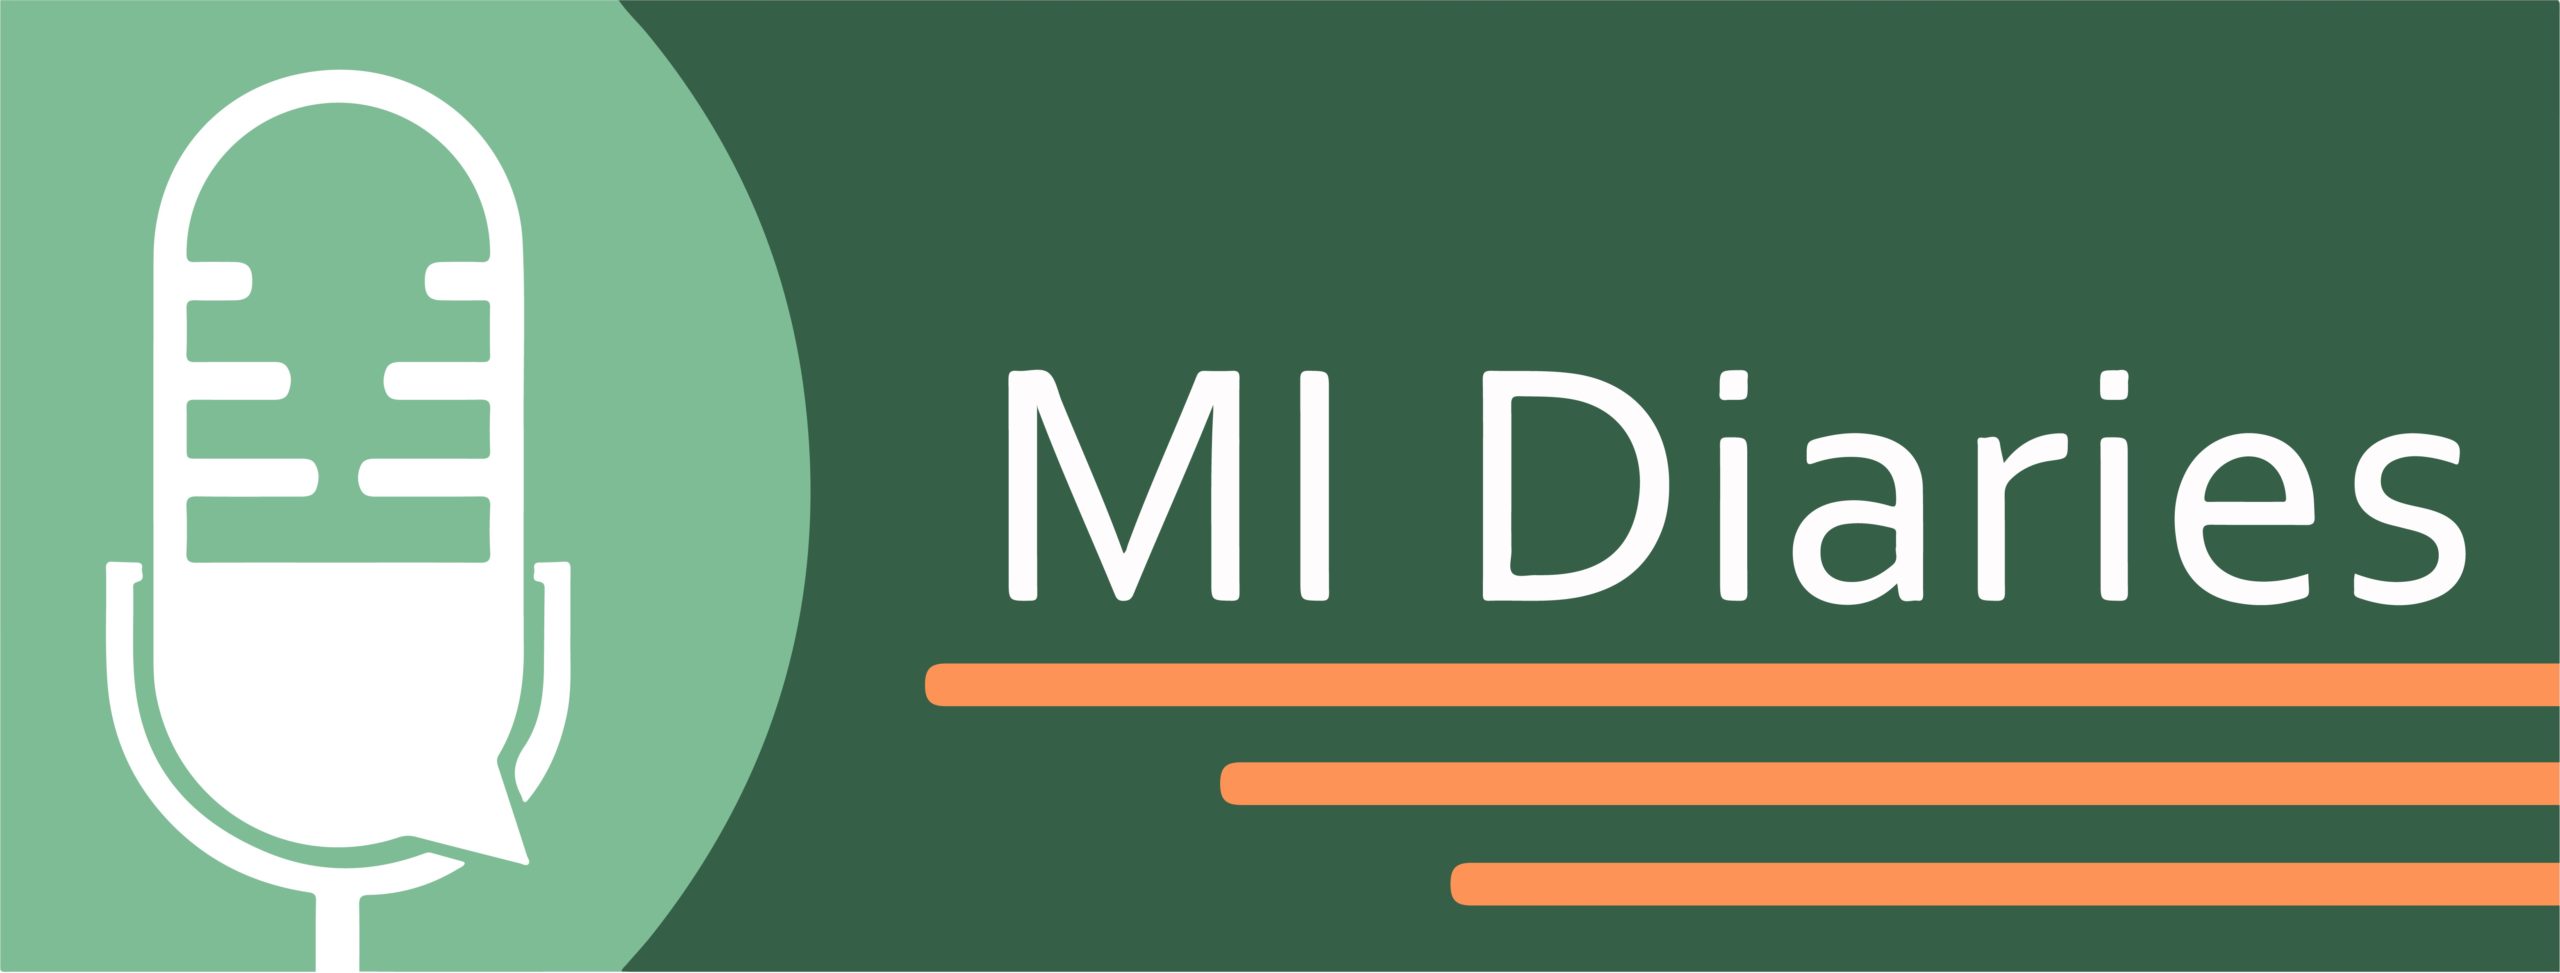 A graphic with the text "MI Diaries" with a simple microphone illustration.